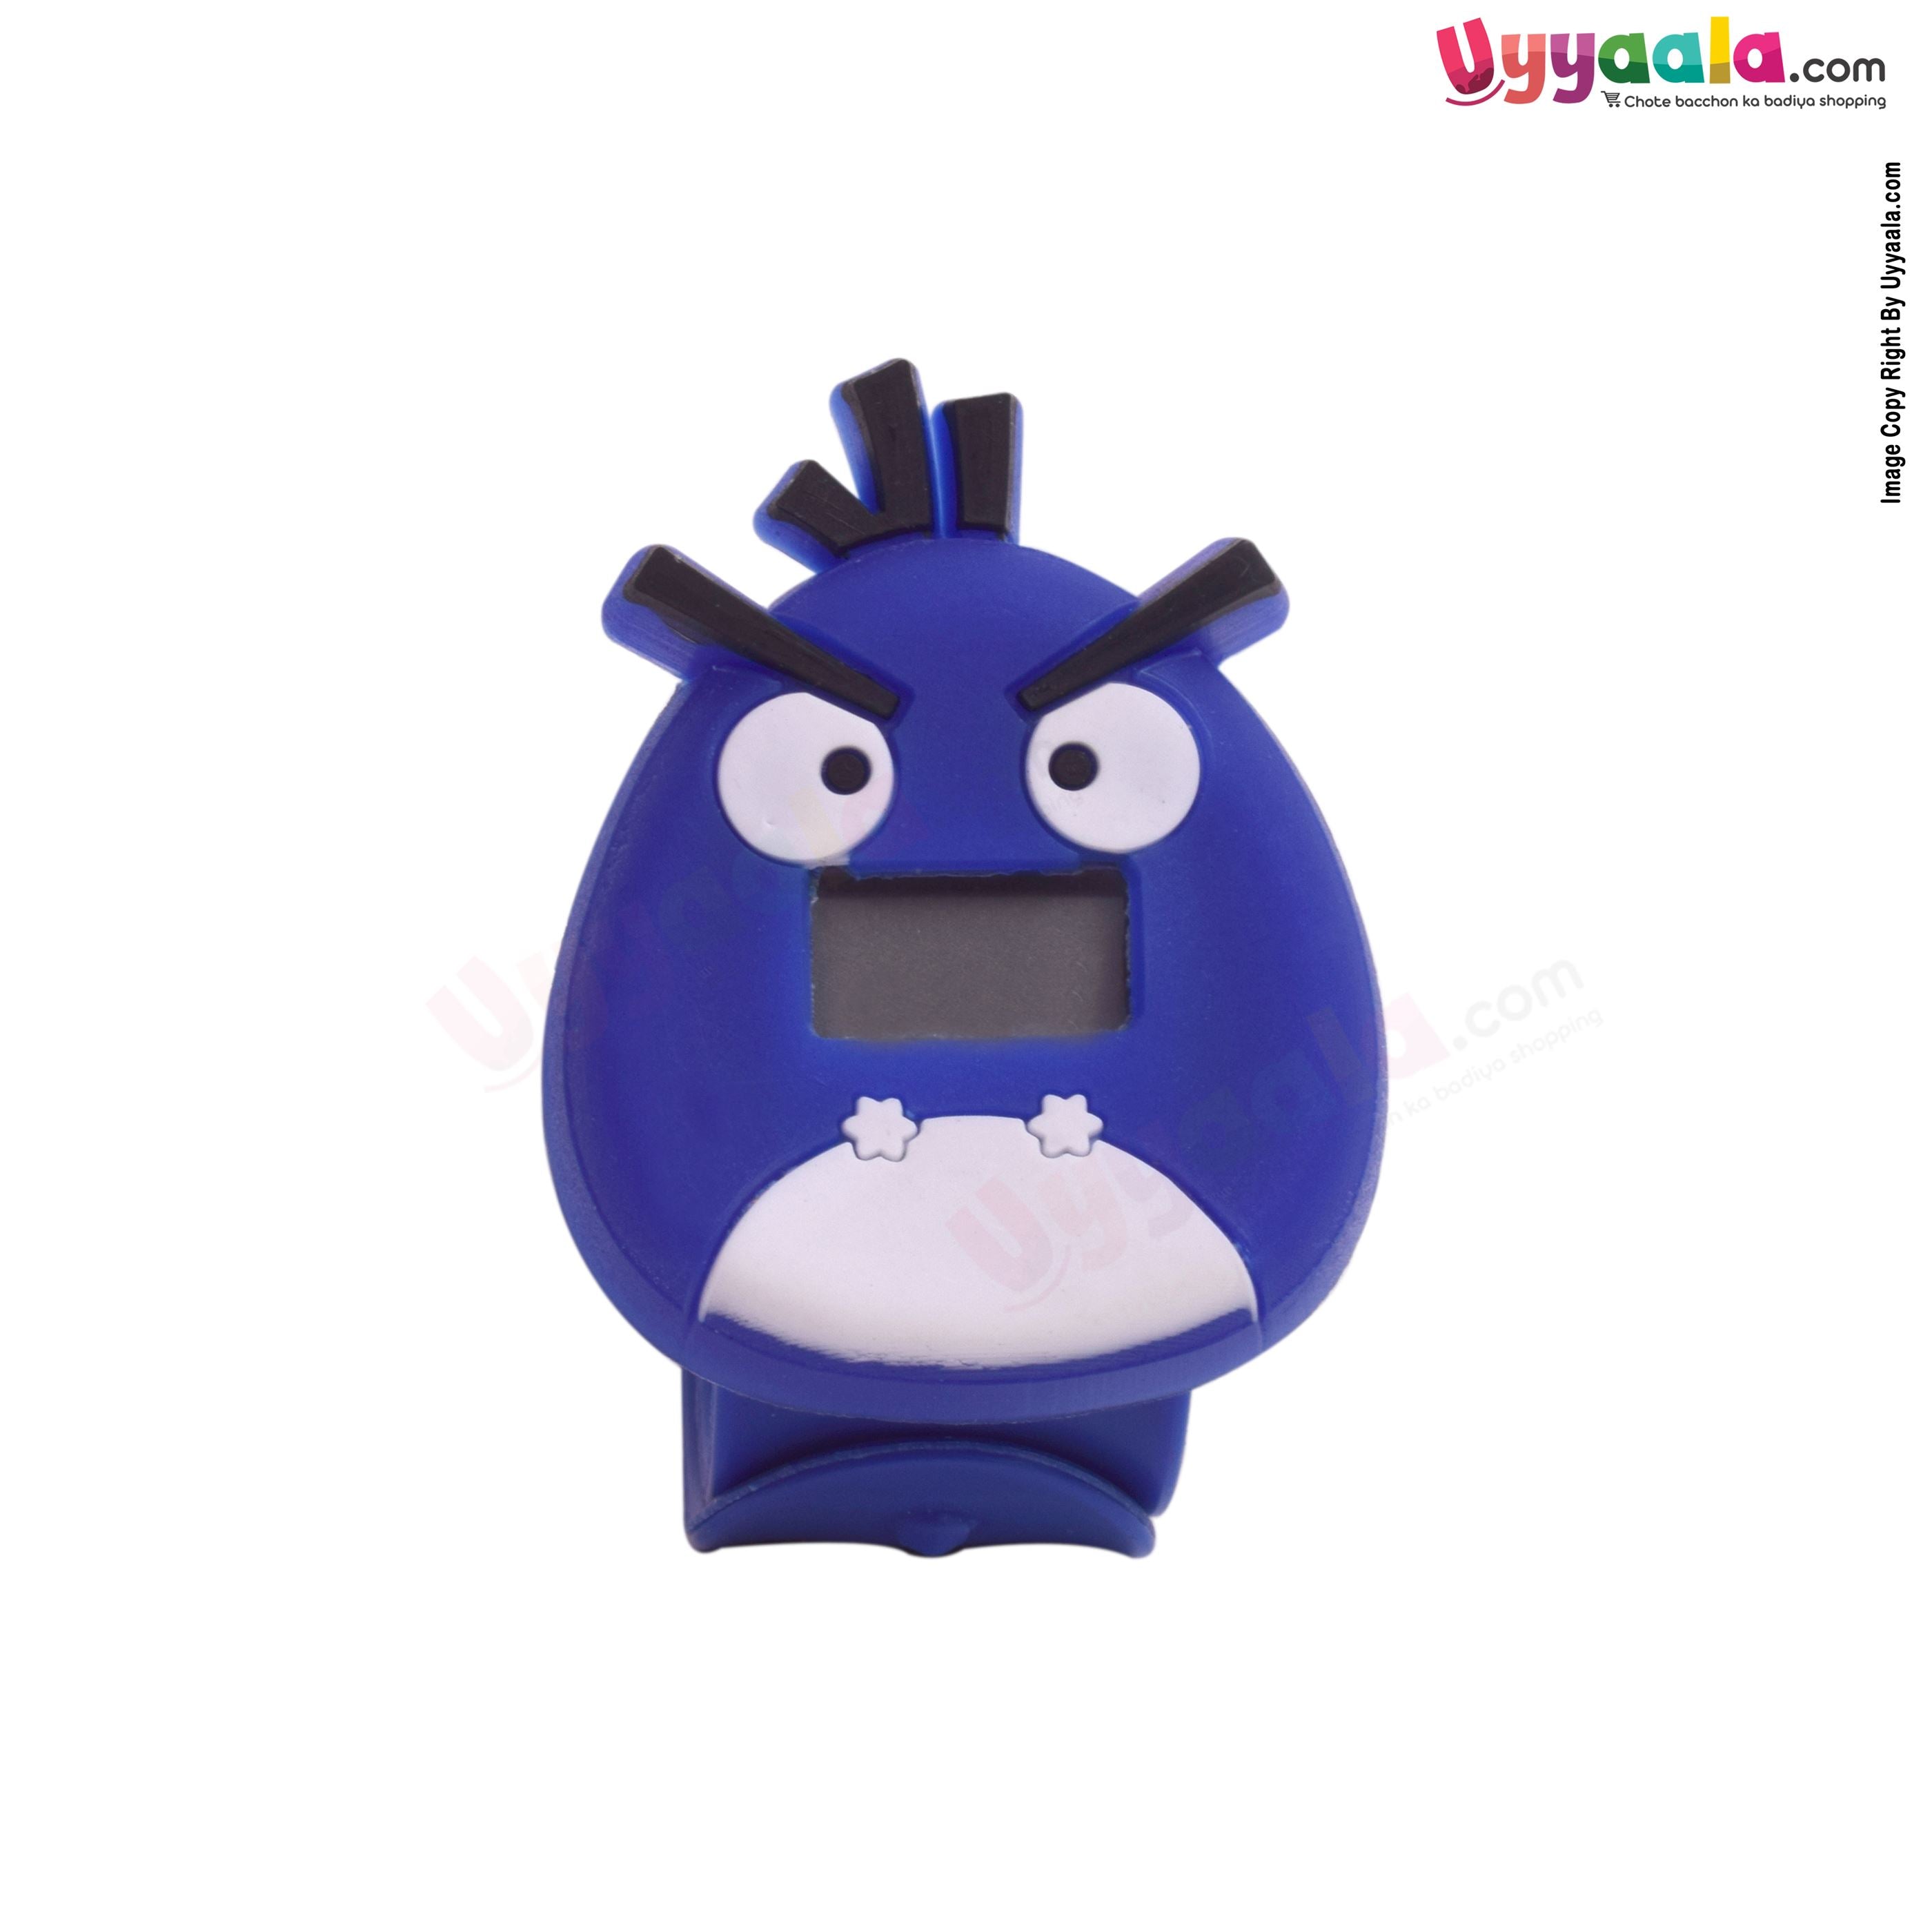 Angry bird analog scale watch for kids